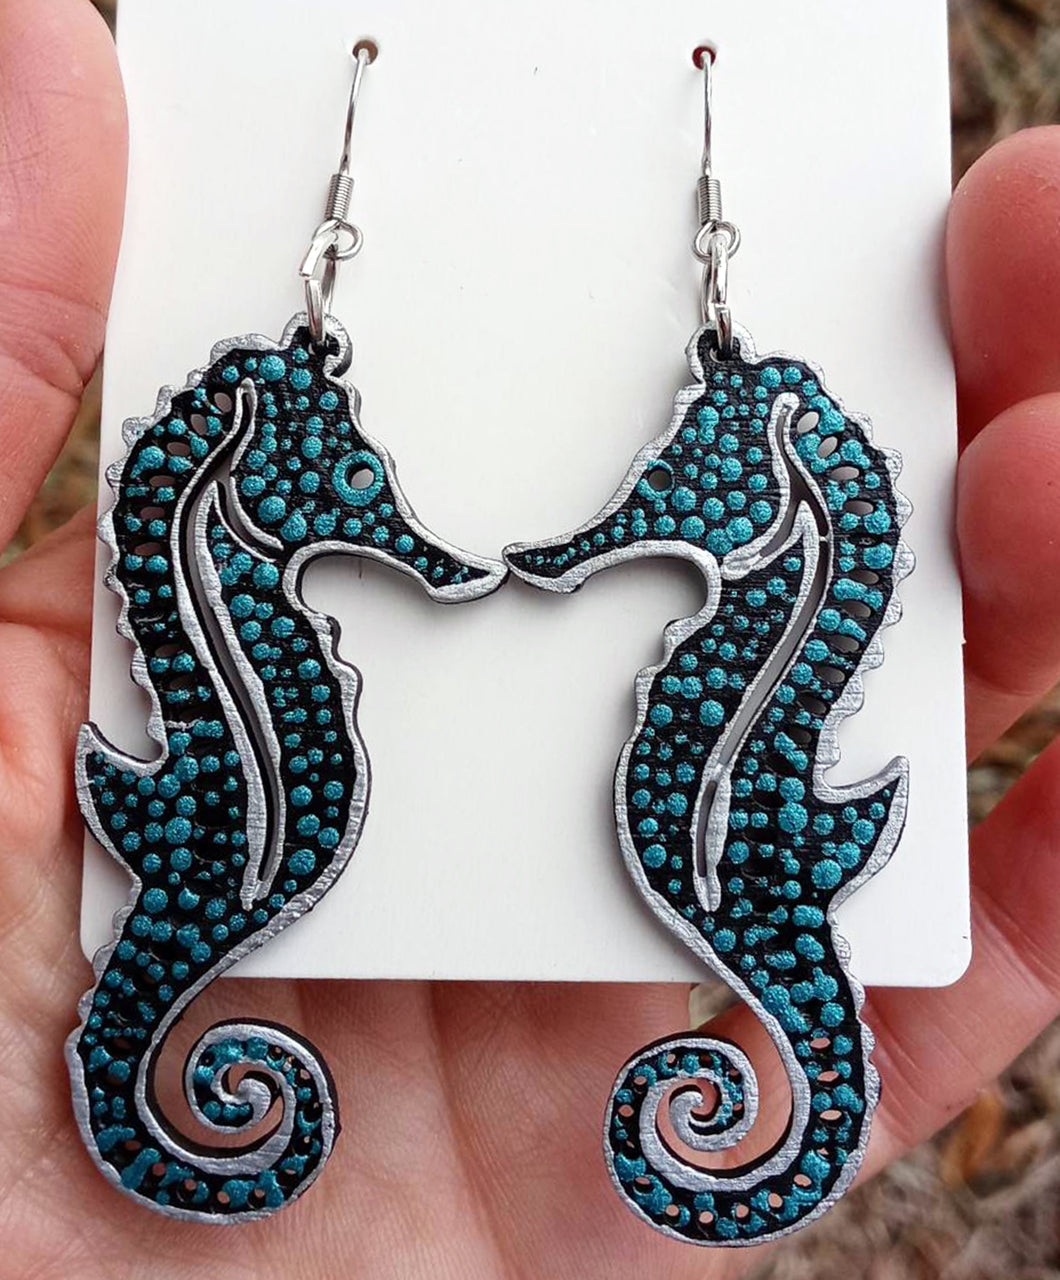 Hand Painted Metallic Silver and Teal Seahorse Earrings